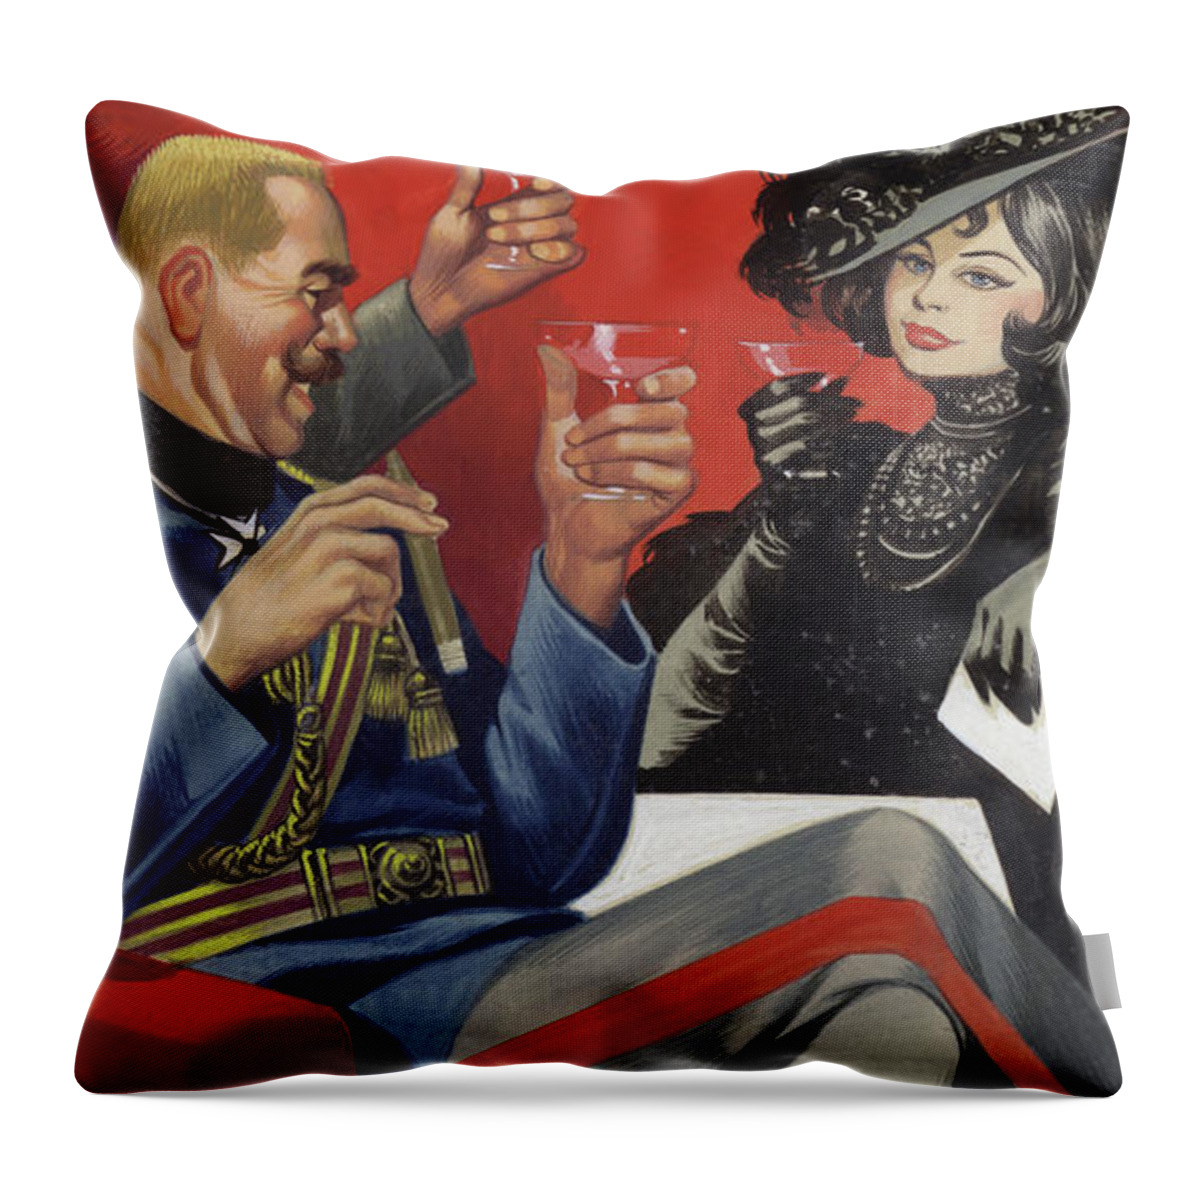 Mata Throw Pillow featuring the painting Mata Hari With Friends Among The German High Command by Ron Embleton